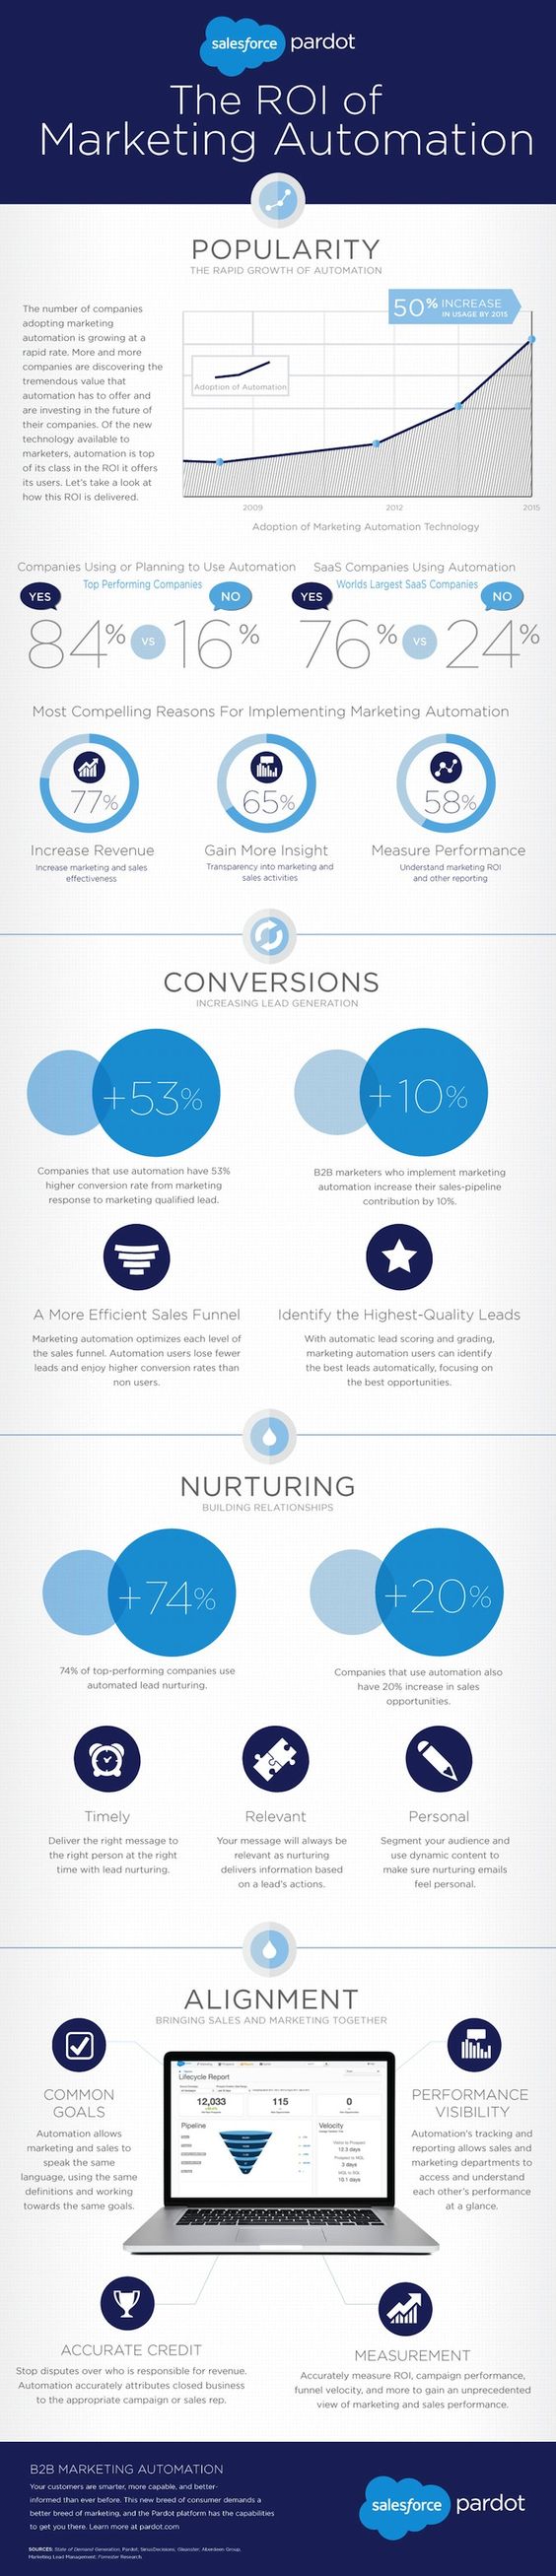 The_ROI_of_Marketing_Automation_Infographic